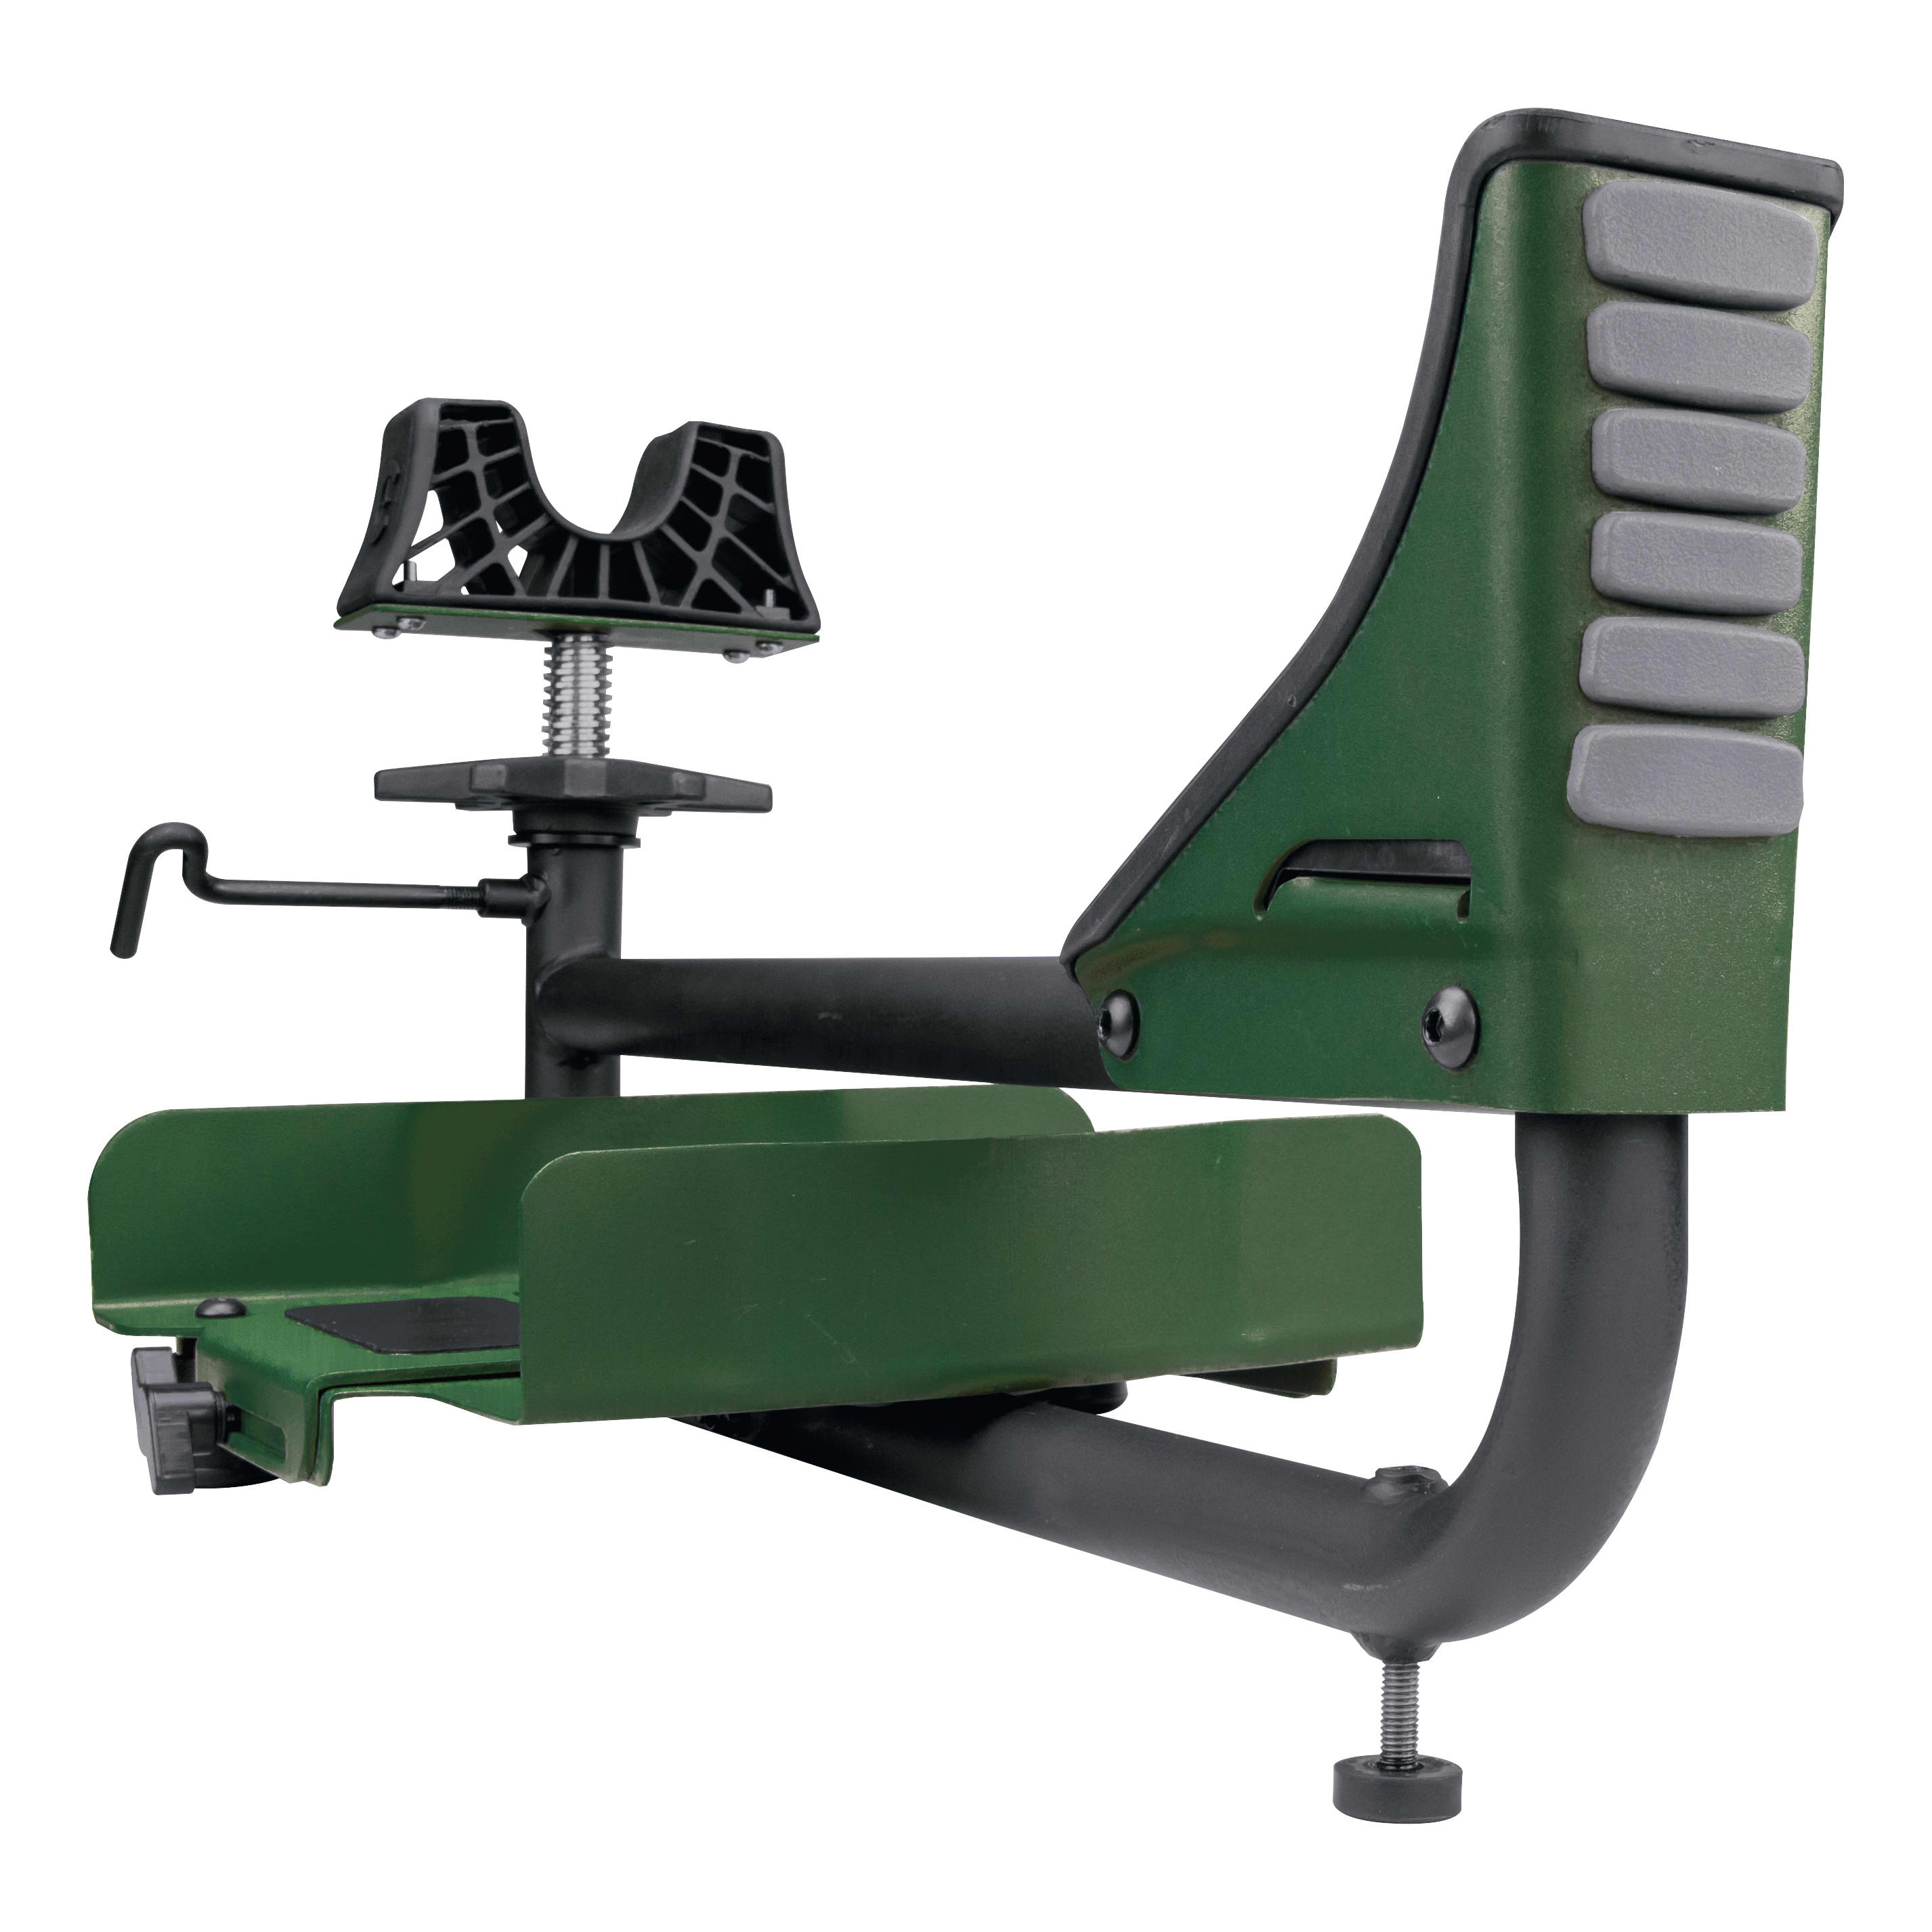 Caldwell® Lead-Sled Plus 3 Shooting Rest - Back View